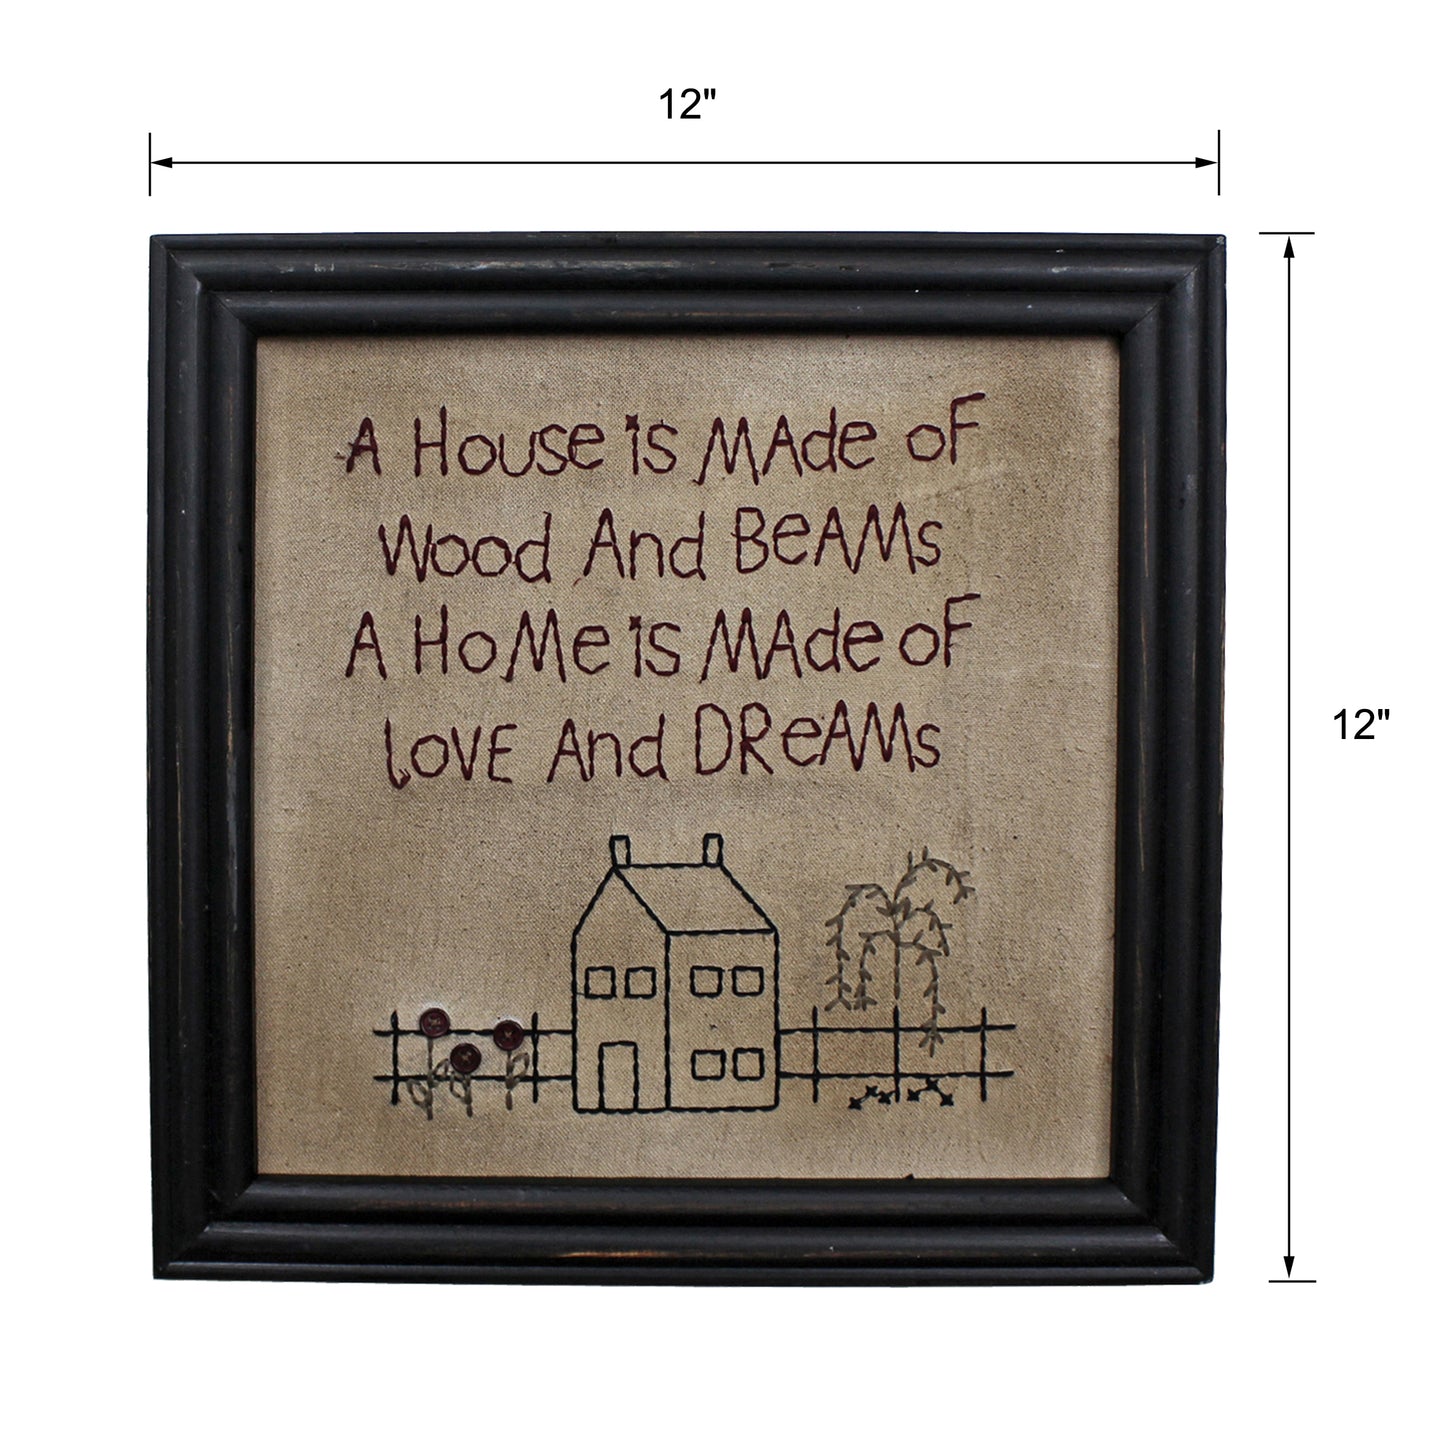 CVHOMEDECO. Primitives Antique A House is Made of Wood and Beams, A Home is Made of Love and Dreams Stitchery Frame Wall Mounted Hanging Decor Art, 12 x 12 Inch